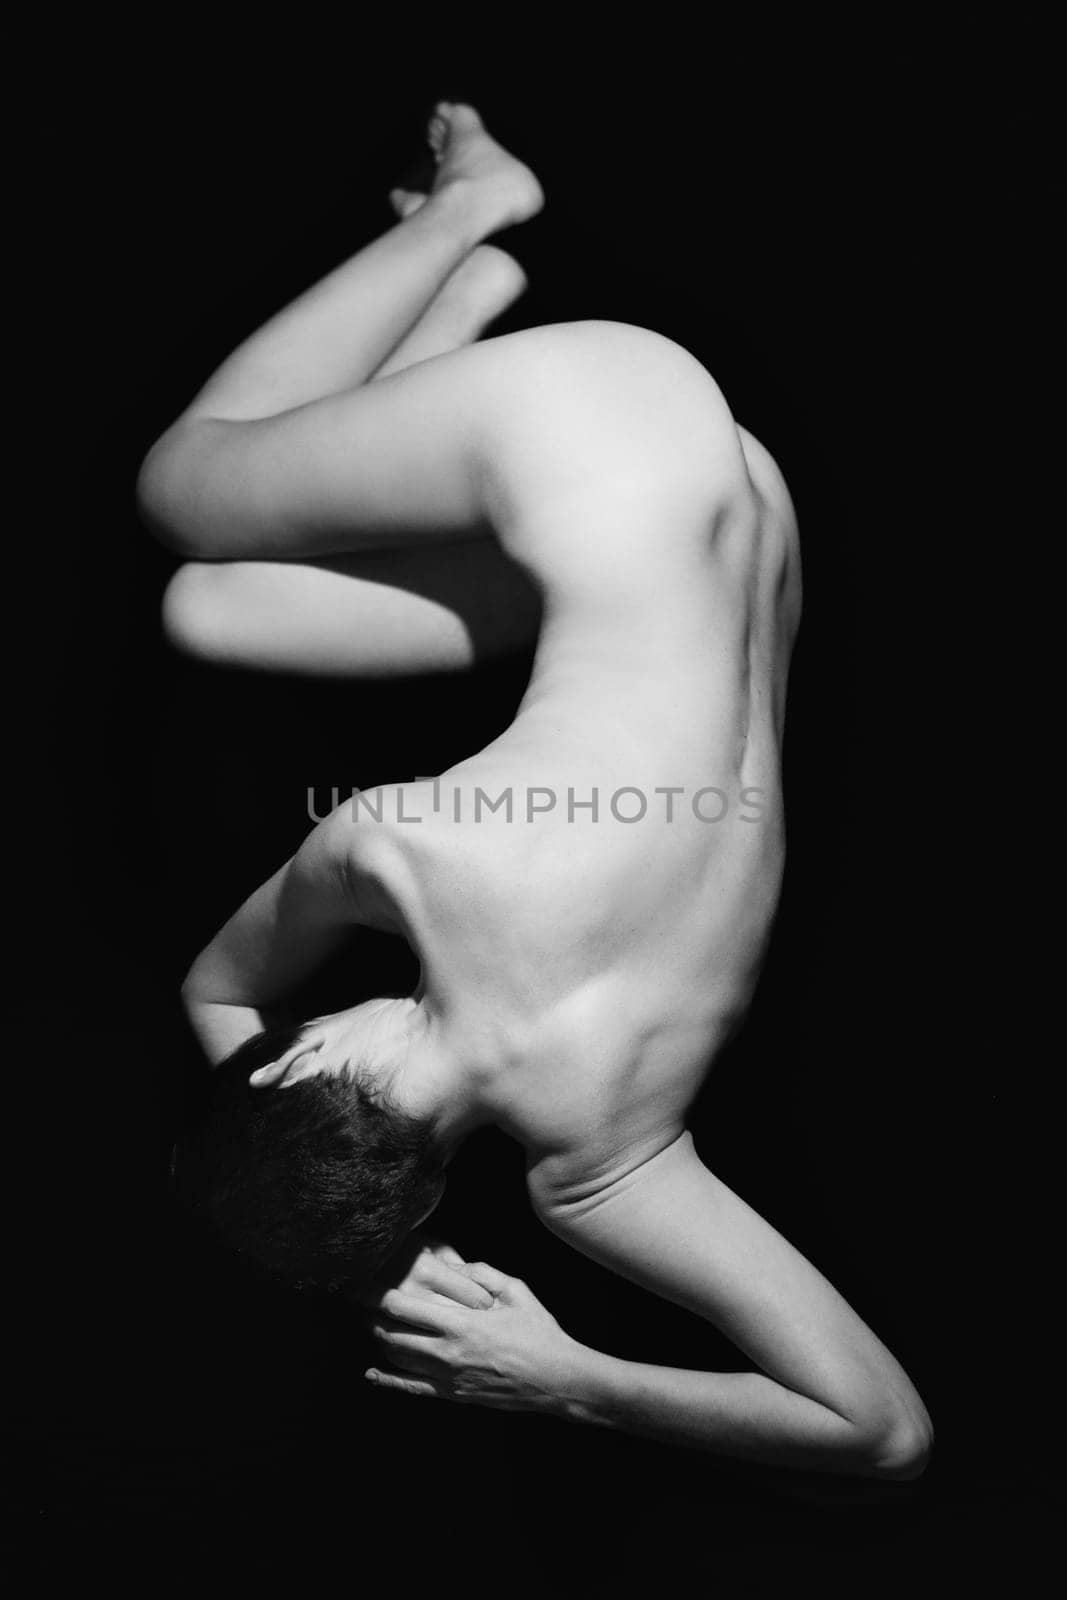 Full body of anonymous fit naked woman with short dark hair lying on floor against black background in studio. Black and white photograph